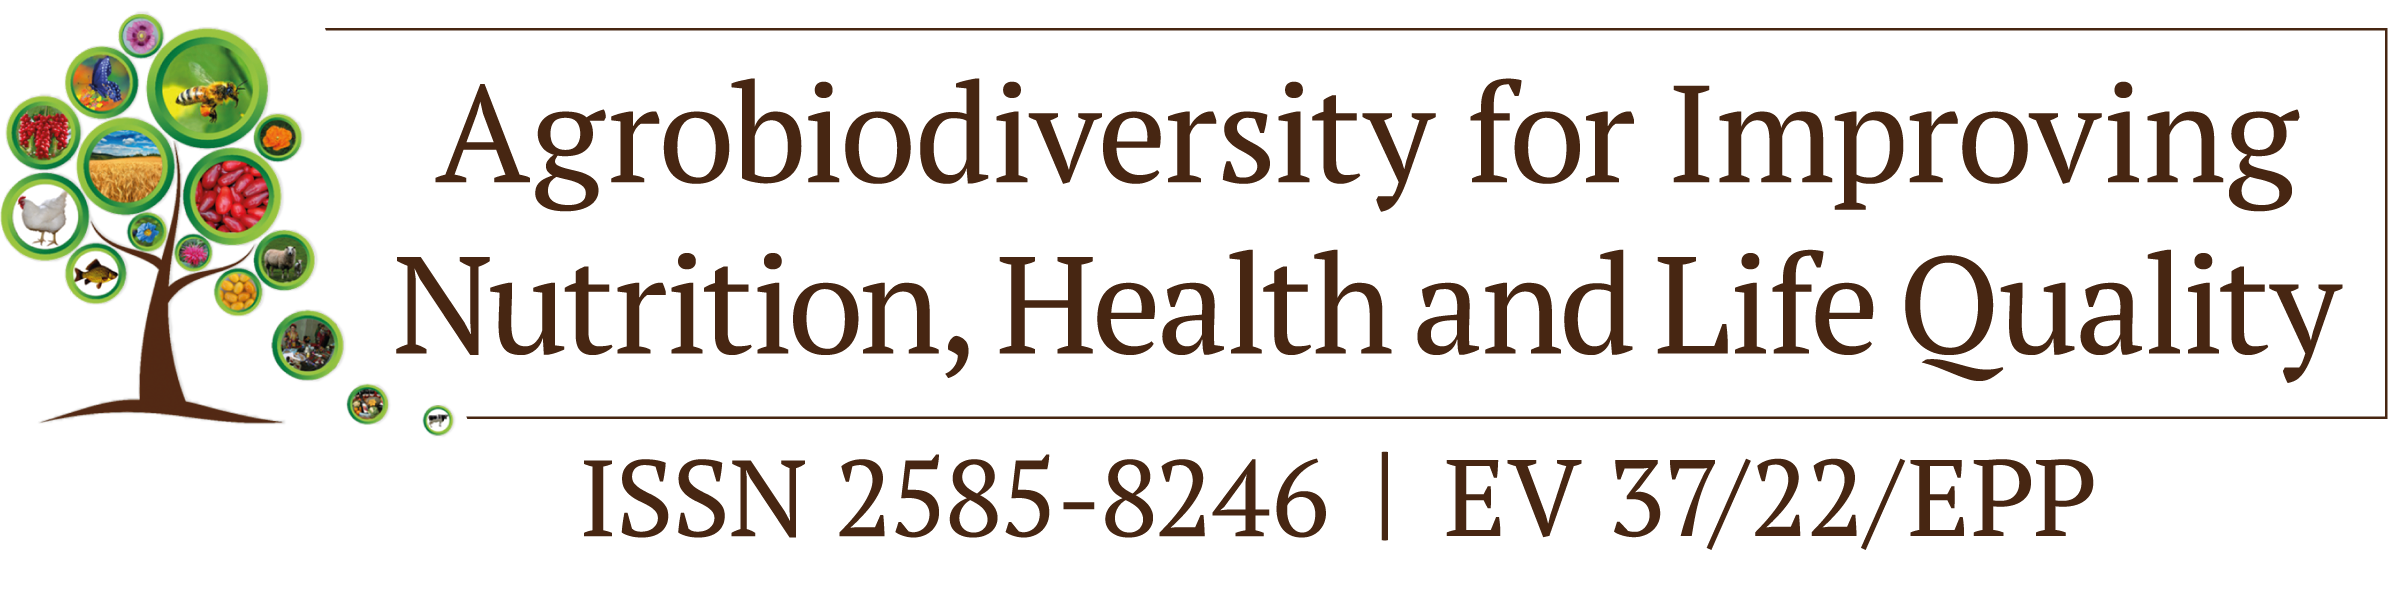 Agrobiodiversity for Improving Nutrition, Health and Life Quality ISSN 2585-8246